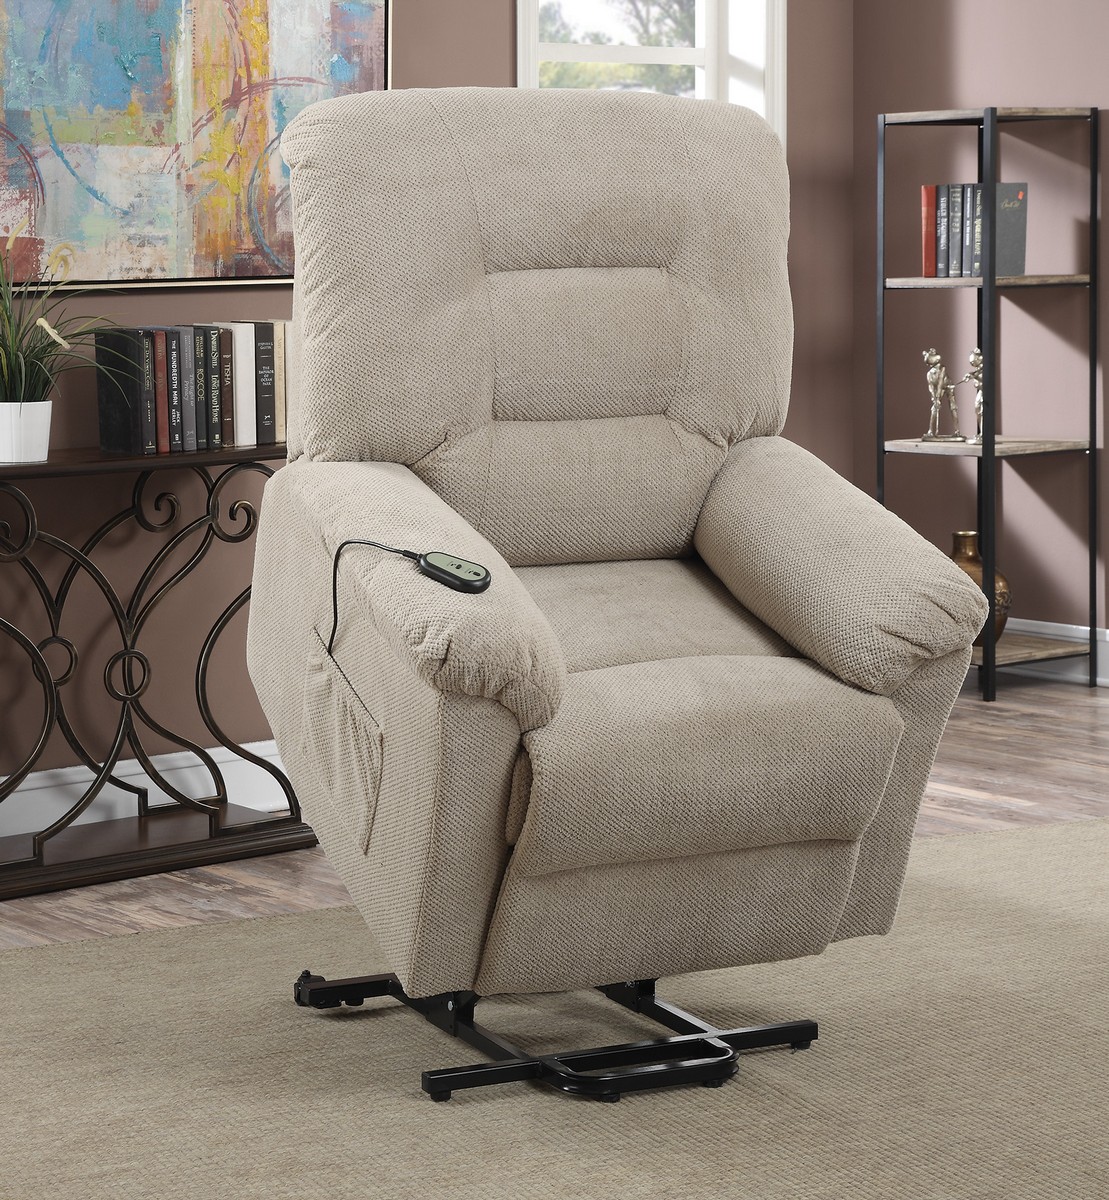 Coaster 600399 Power Lift Recliner - Taupe